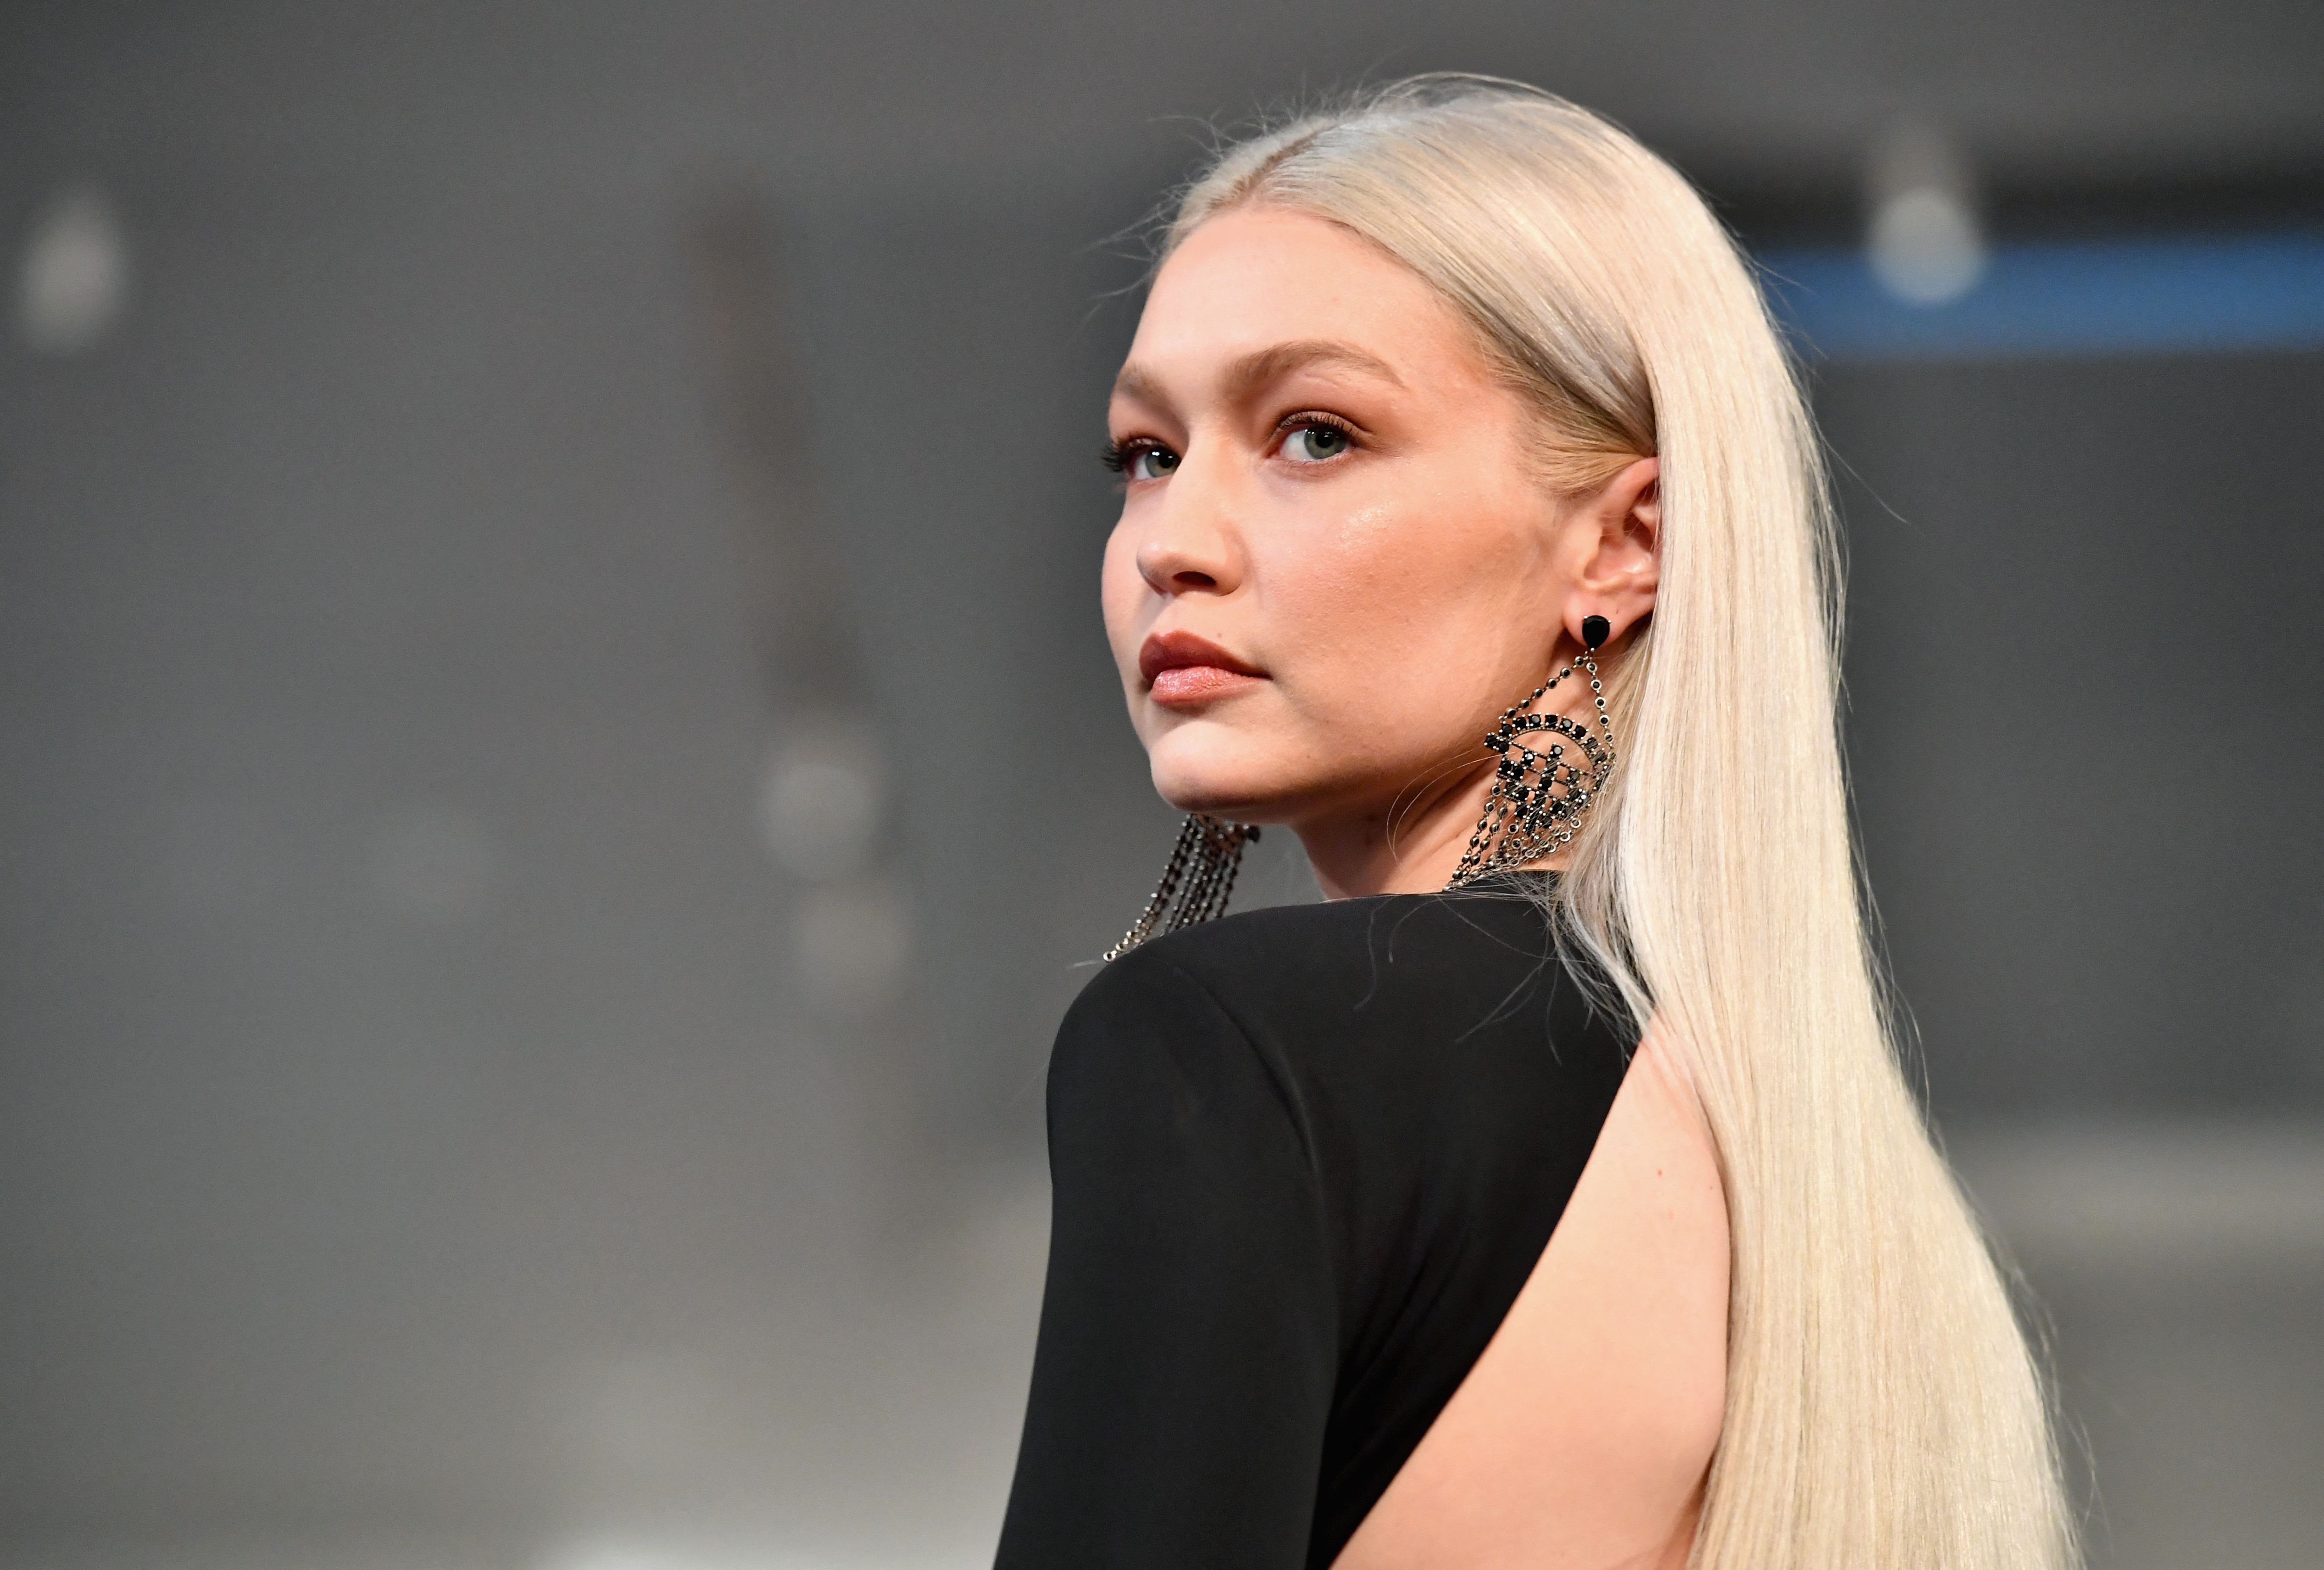 Gigi Hadid's 12 Best Beauty Looks To Date: Runway To Red Carpet